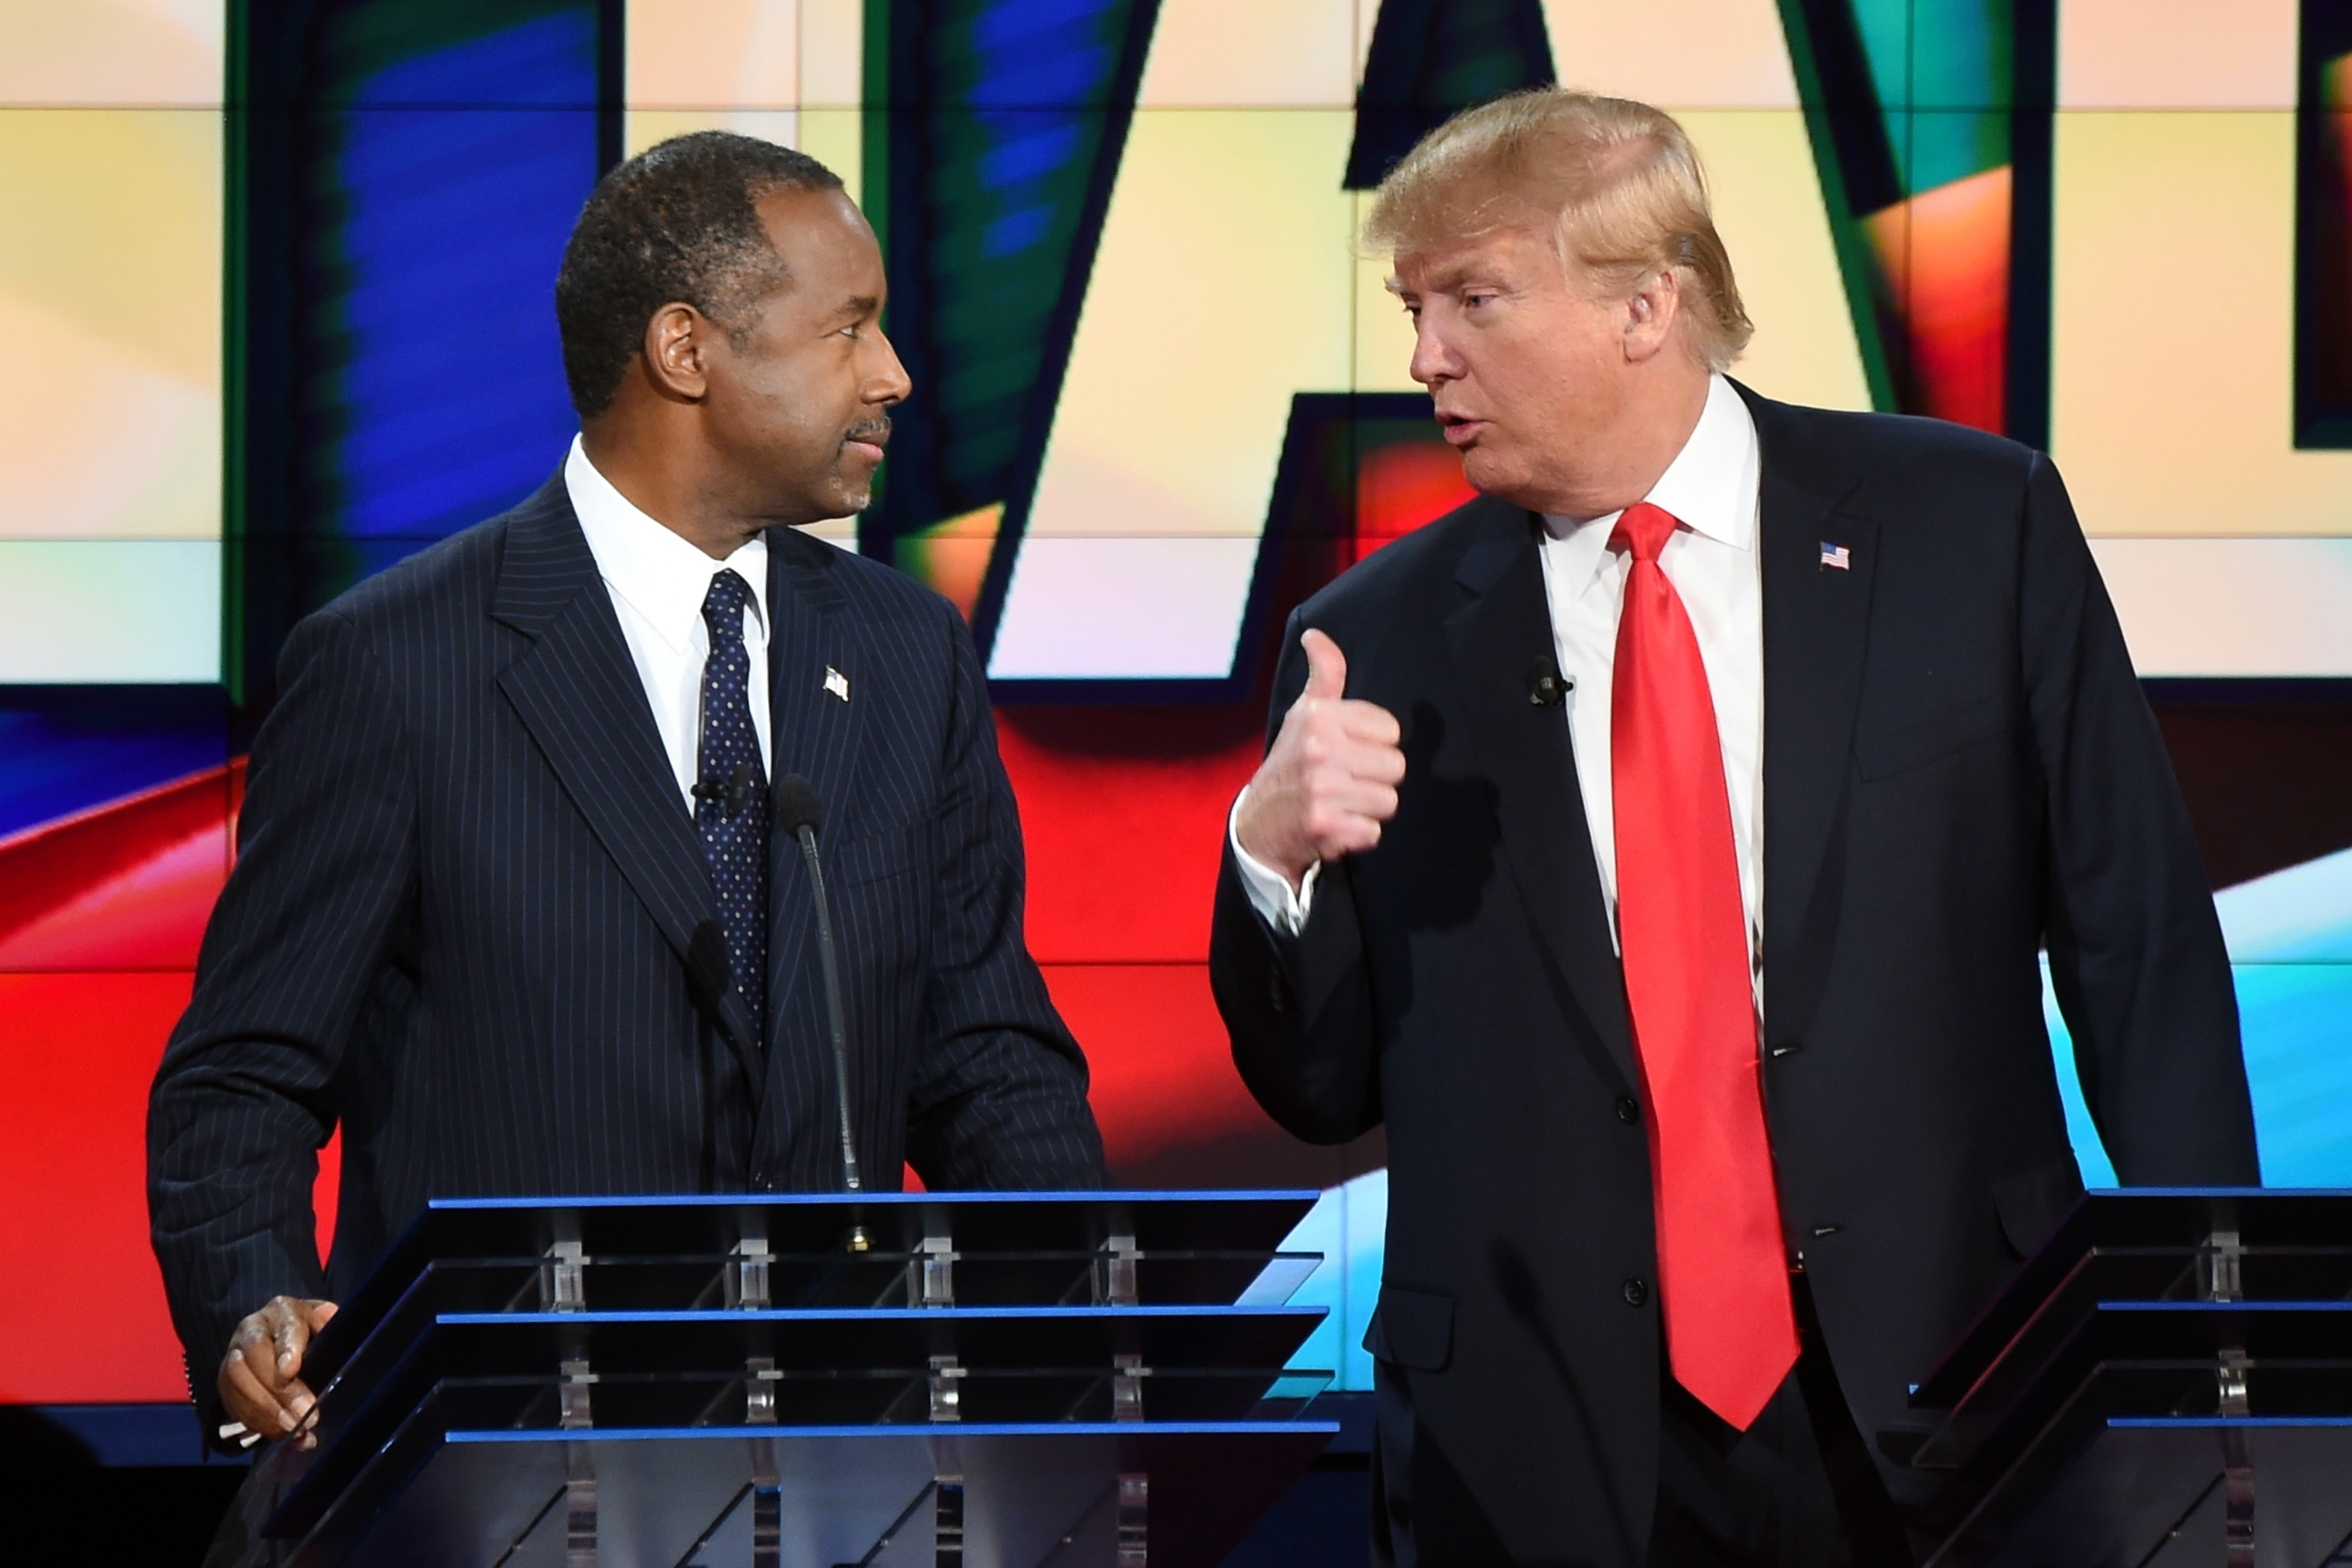 Republican presidential candidates Ben Carson, left and Donald Trump speak at a Republican presidential debate in Las Vegas in December. (Robyn Beck—AFP/Getty Images)